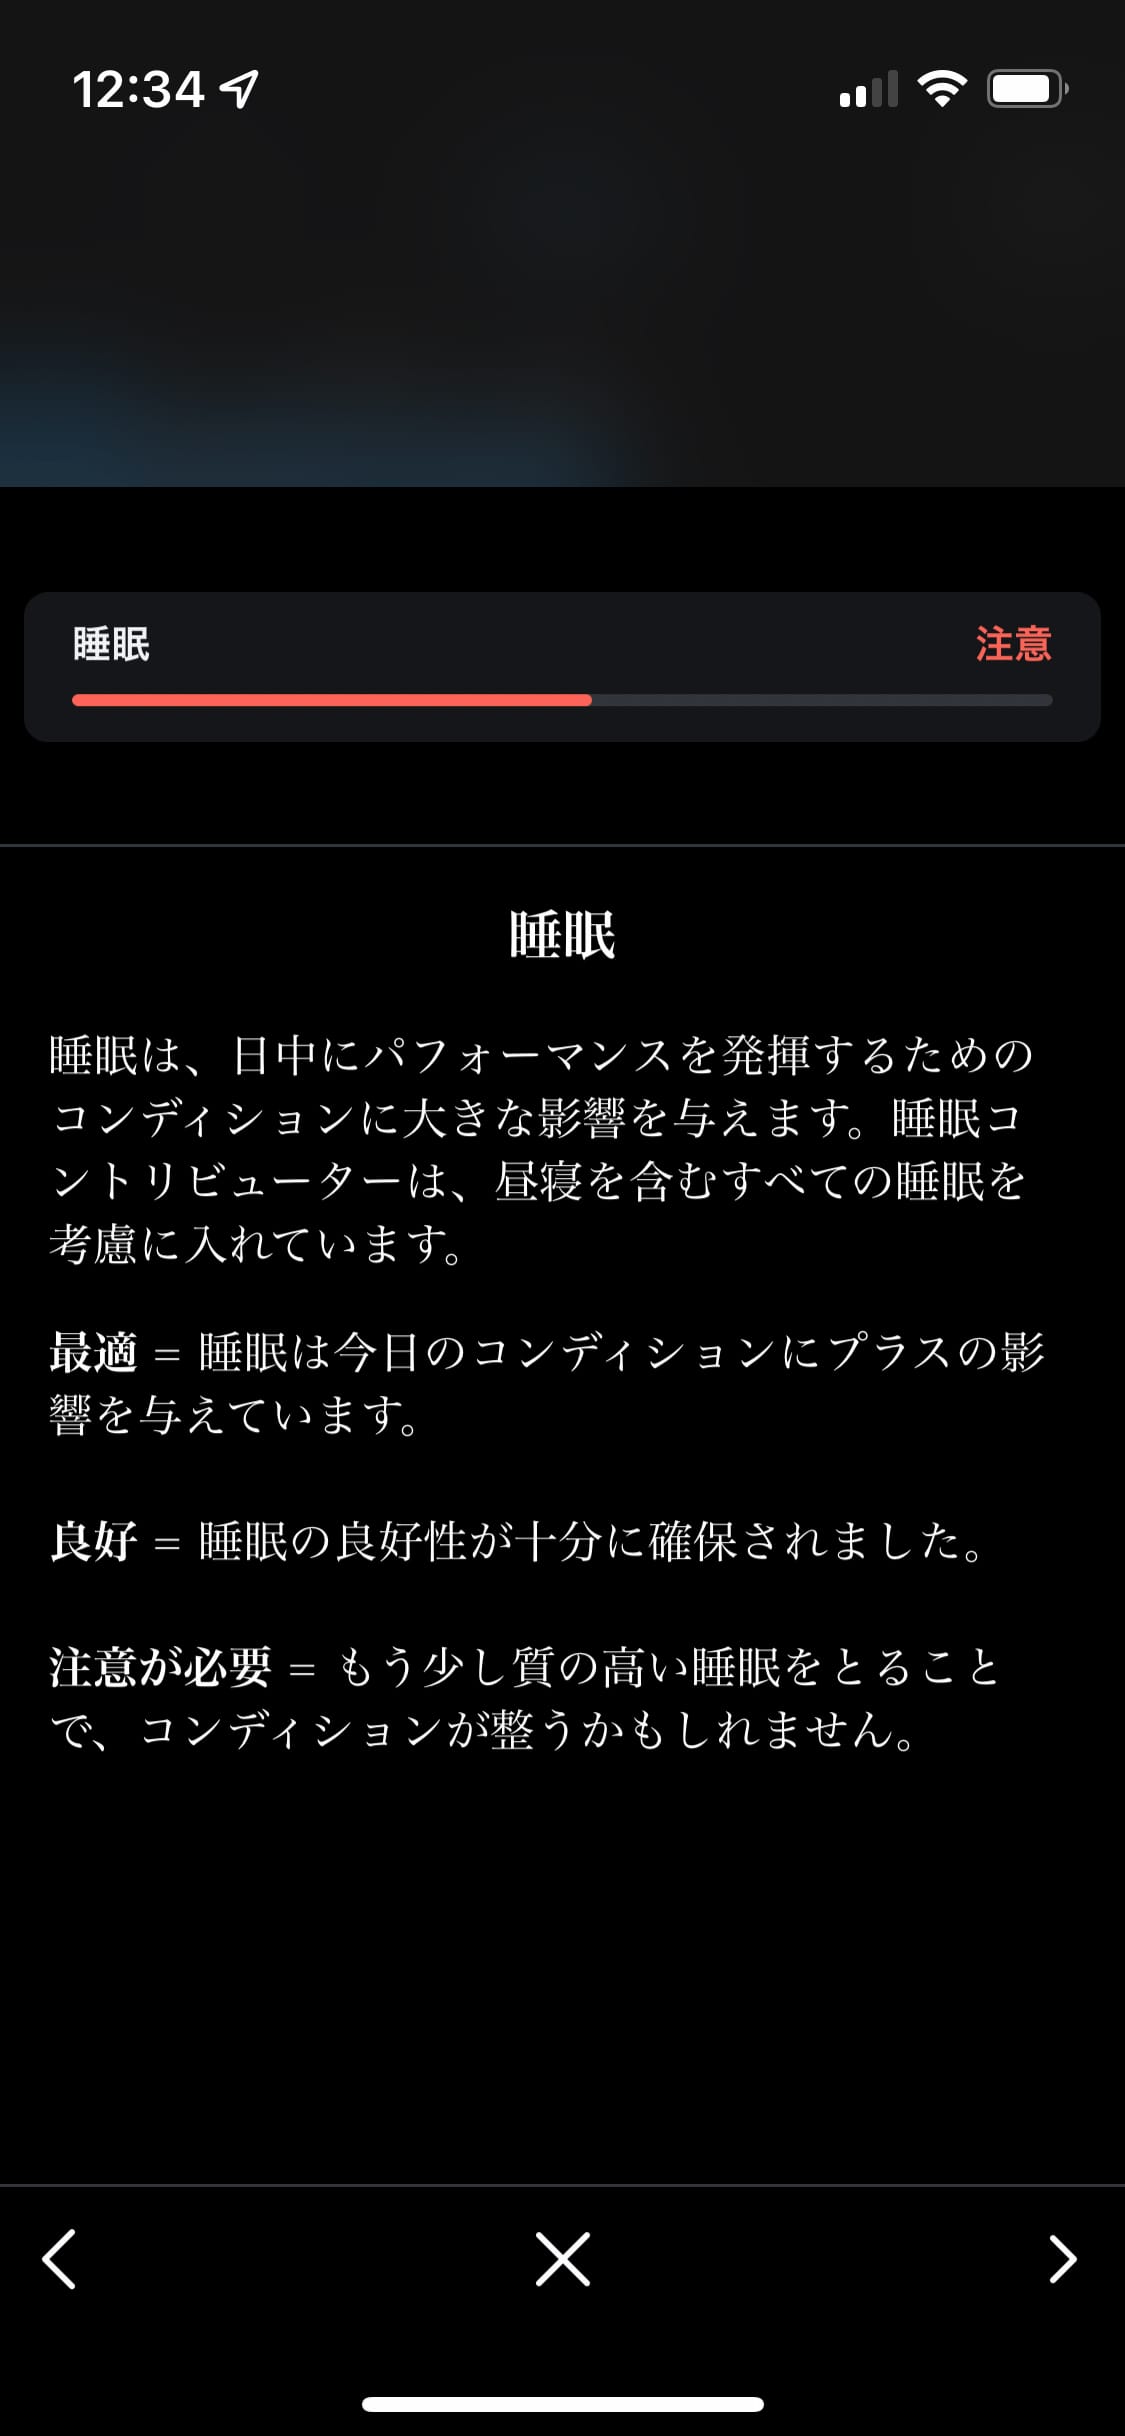 Oura Ringのアプリ画面